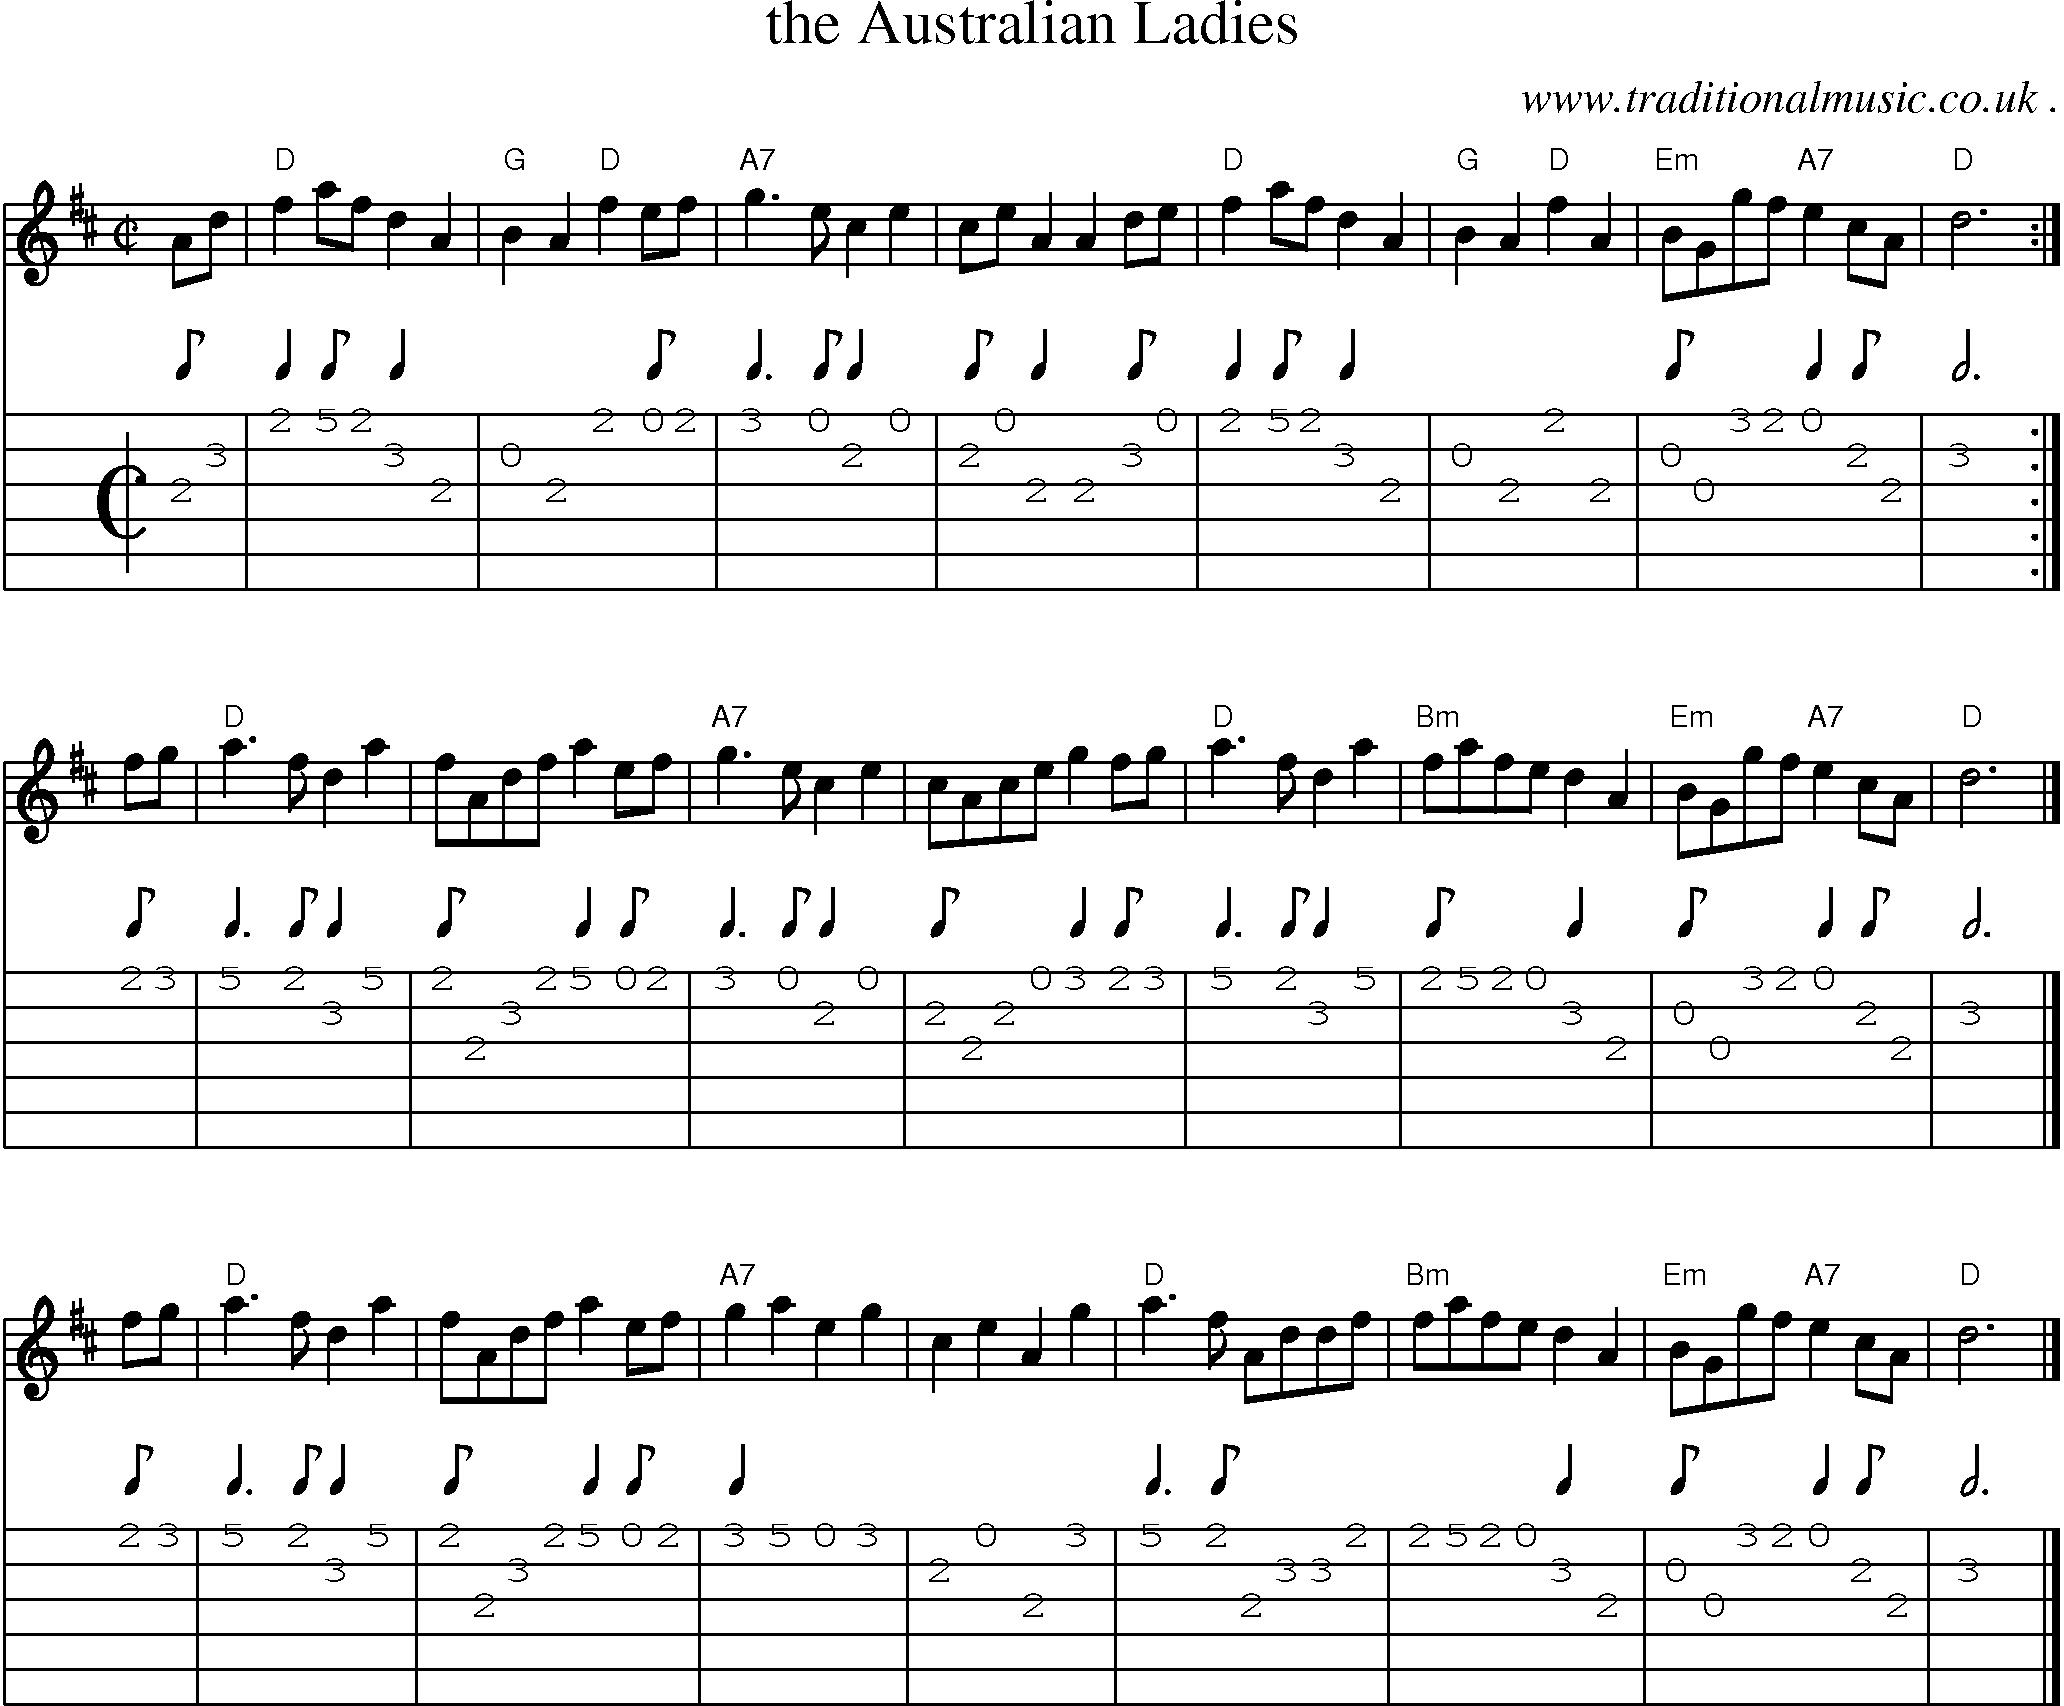 Sheet-music  score, Chords and Guitar Tabs for The Australian Ladies